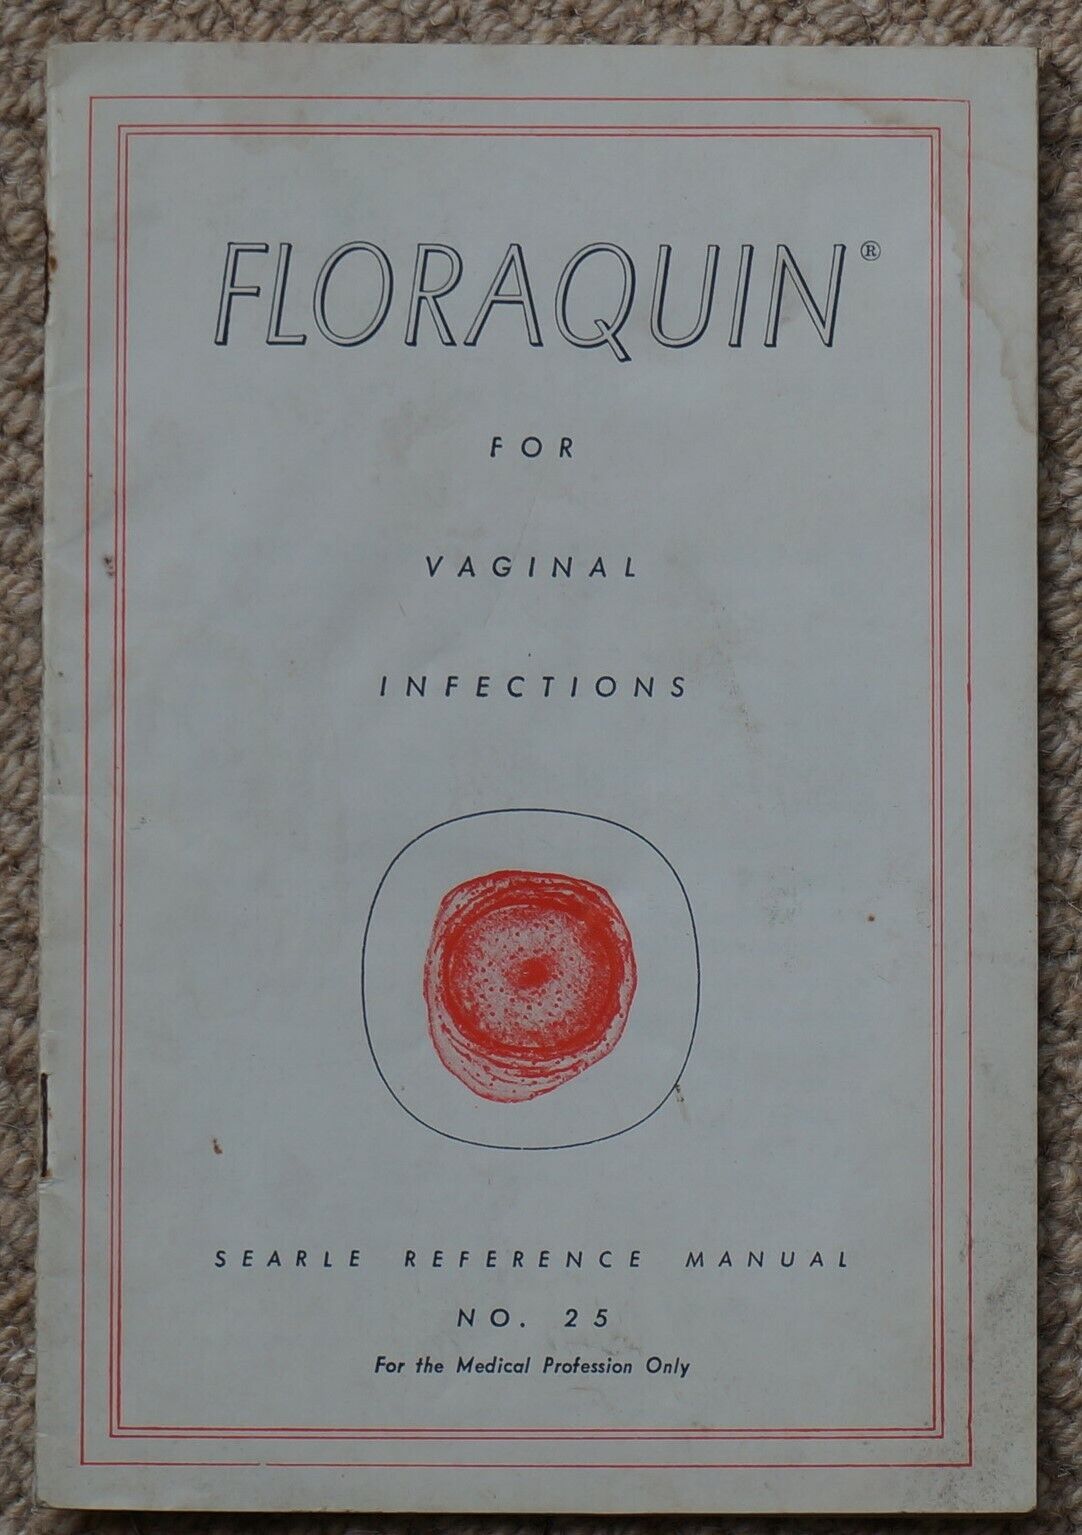 Floraquin for Vaginal Infections, Searle Reference Manual No. 25, 1953, 22 pages